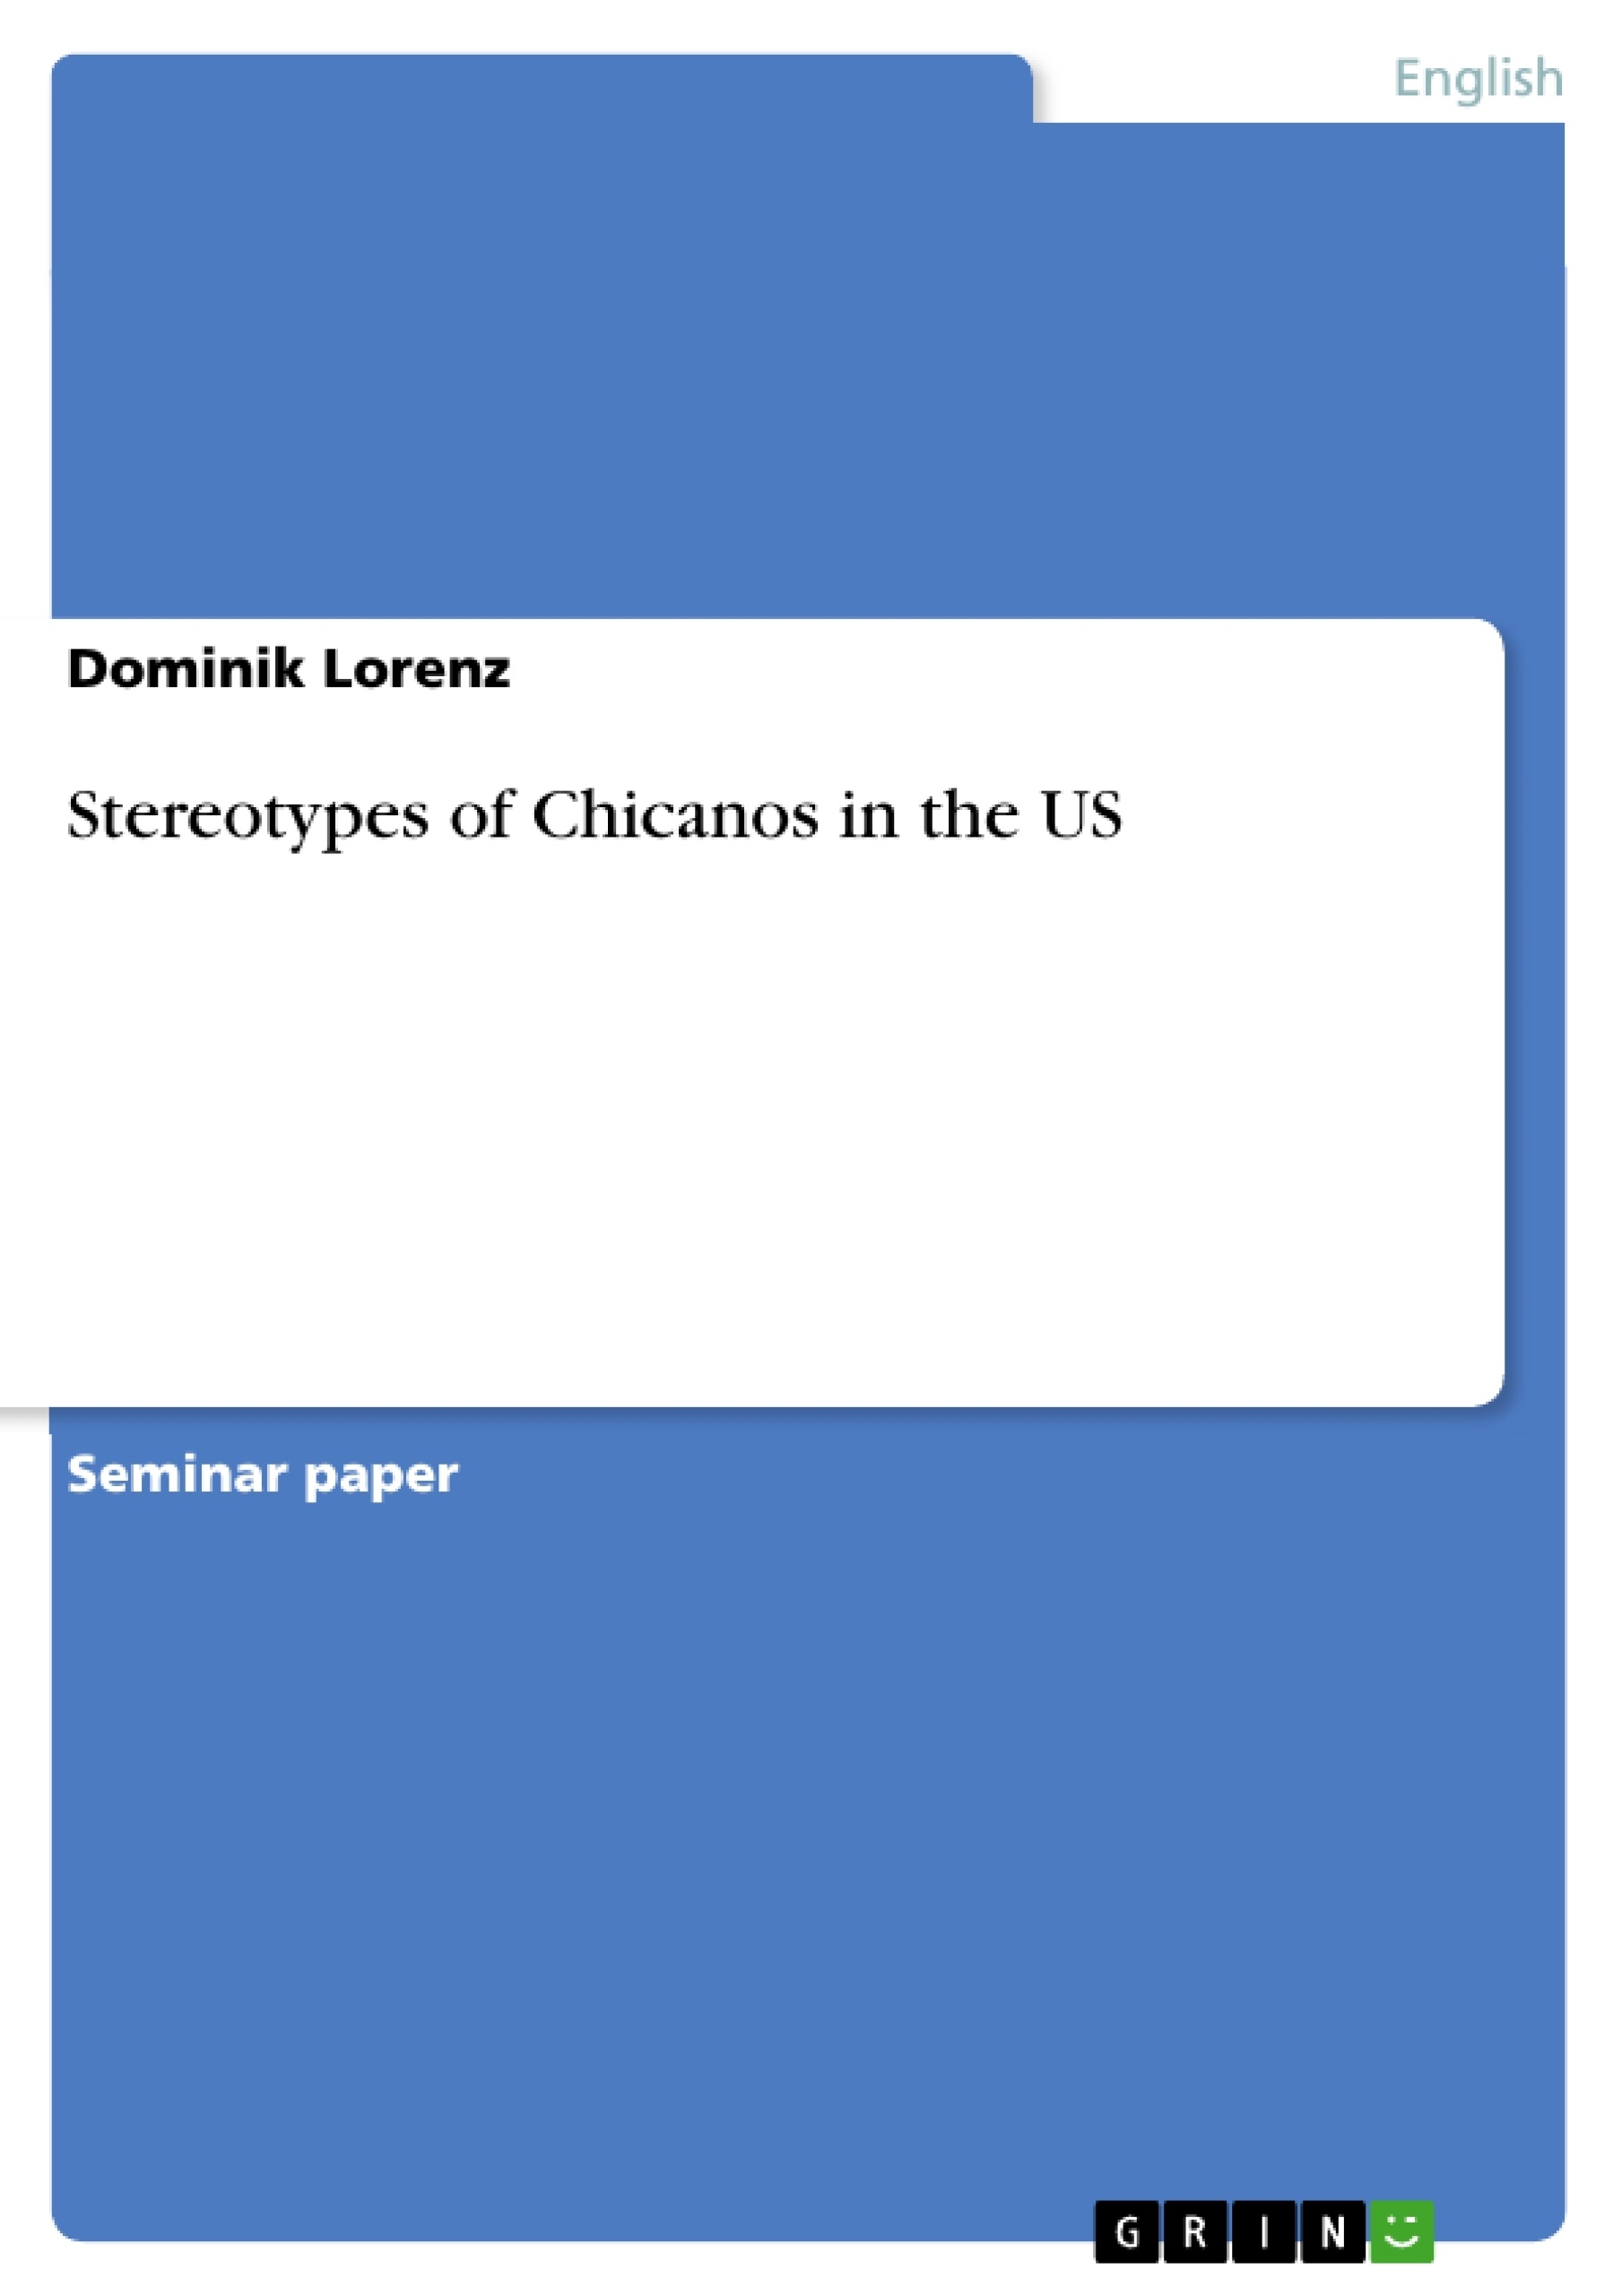 Title: Stereotypes of Chicanos in the US